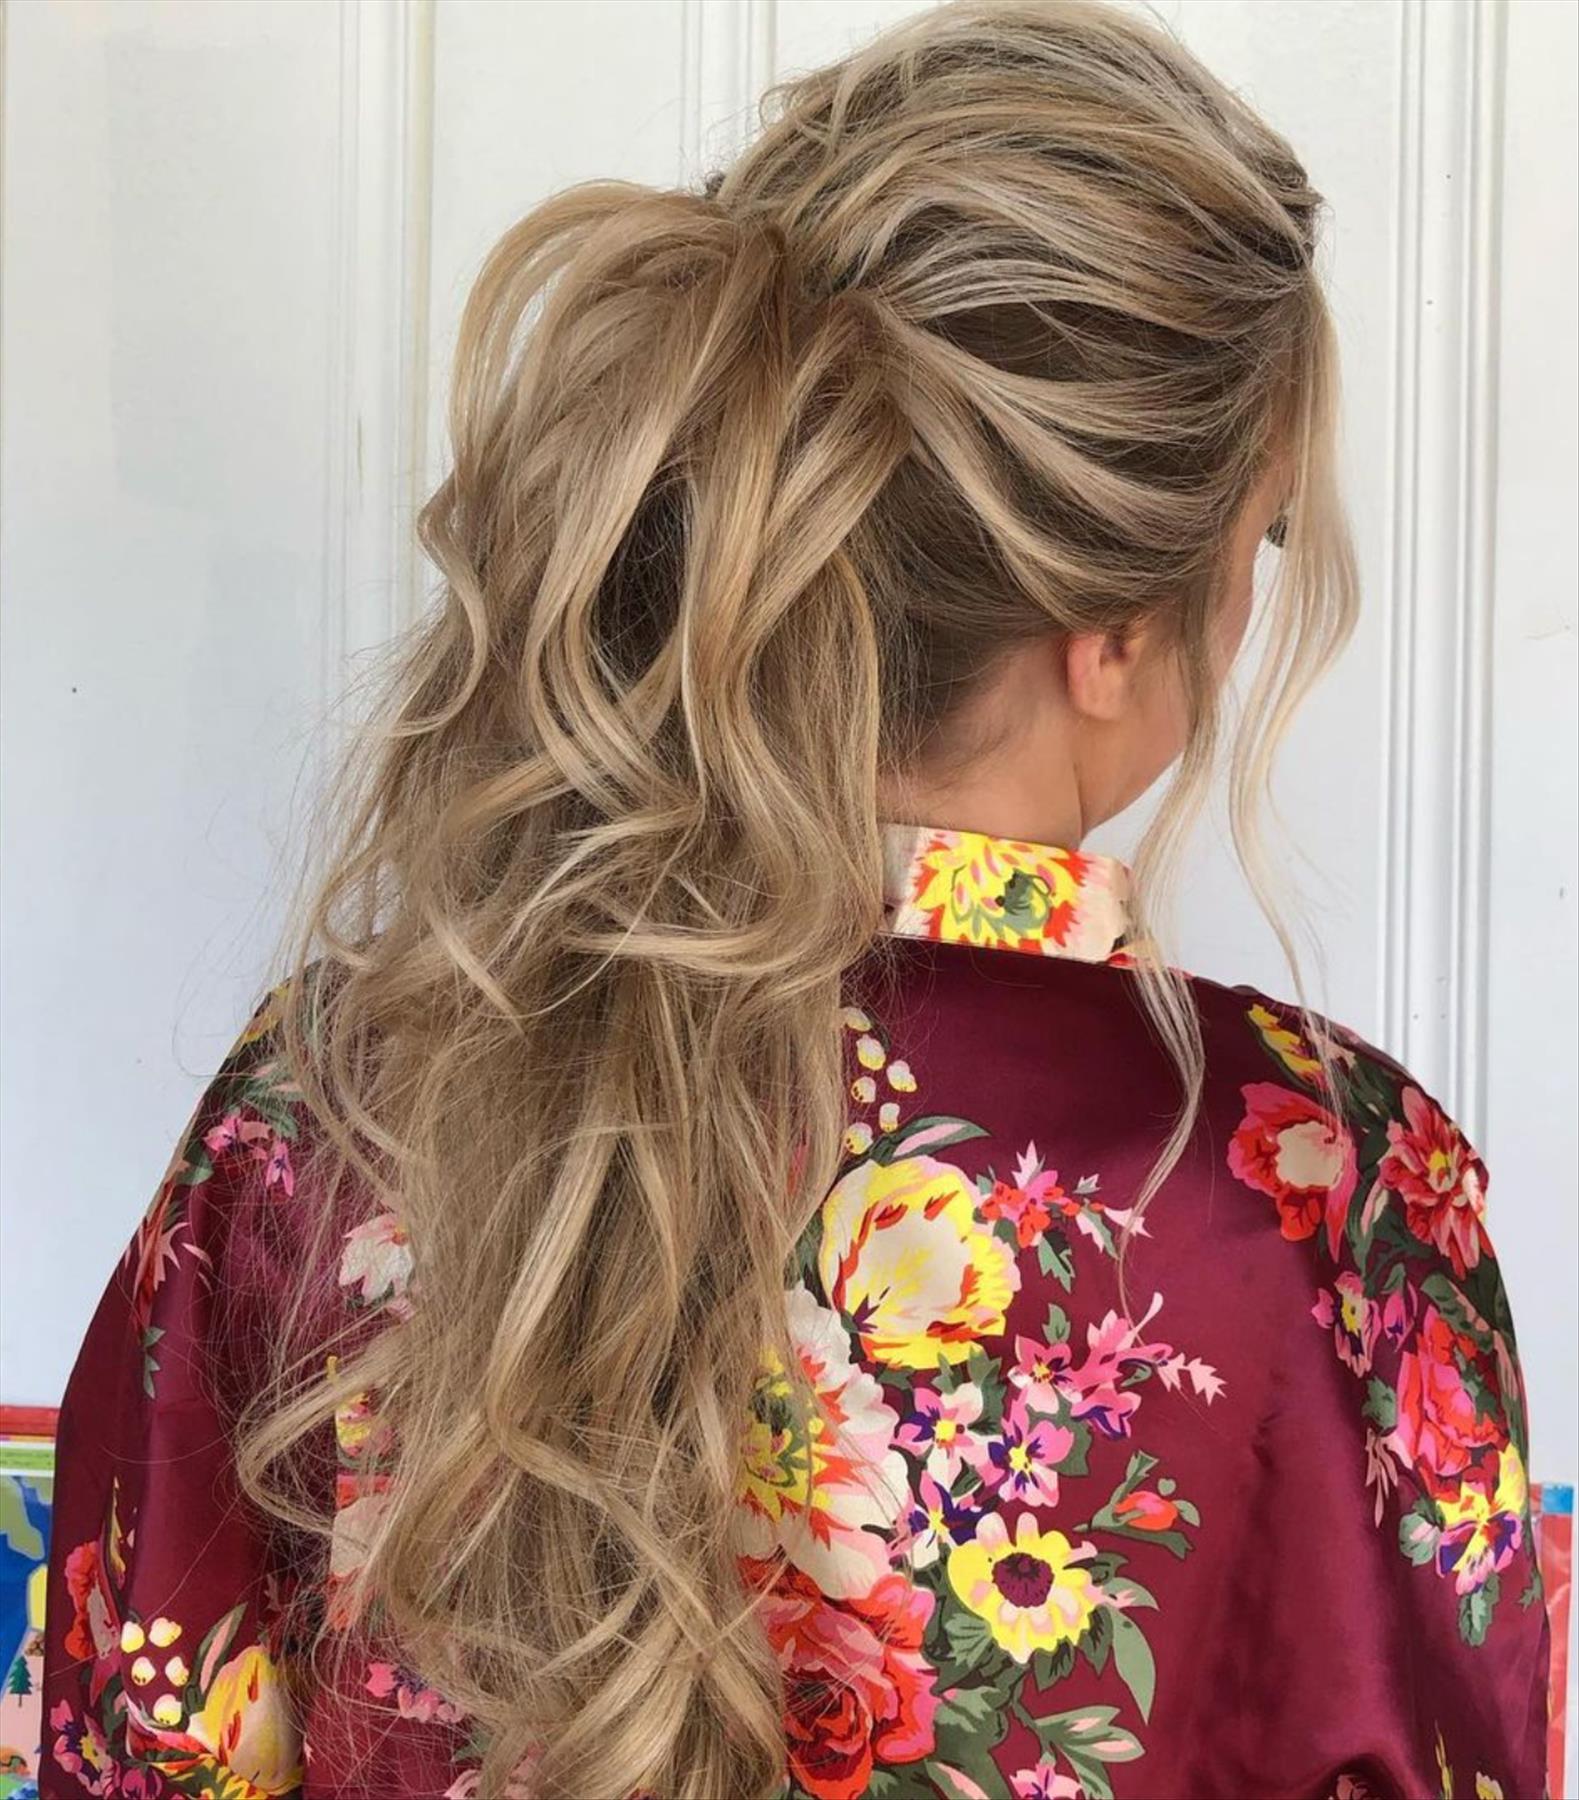 Easy ponytail hairstyles for long hair to wear 